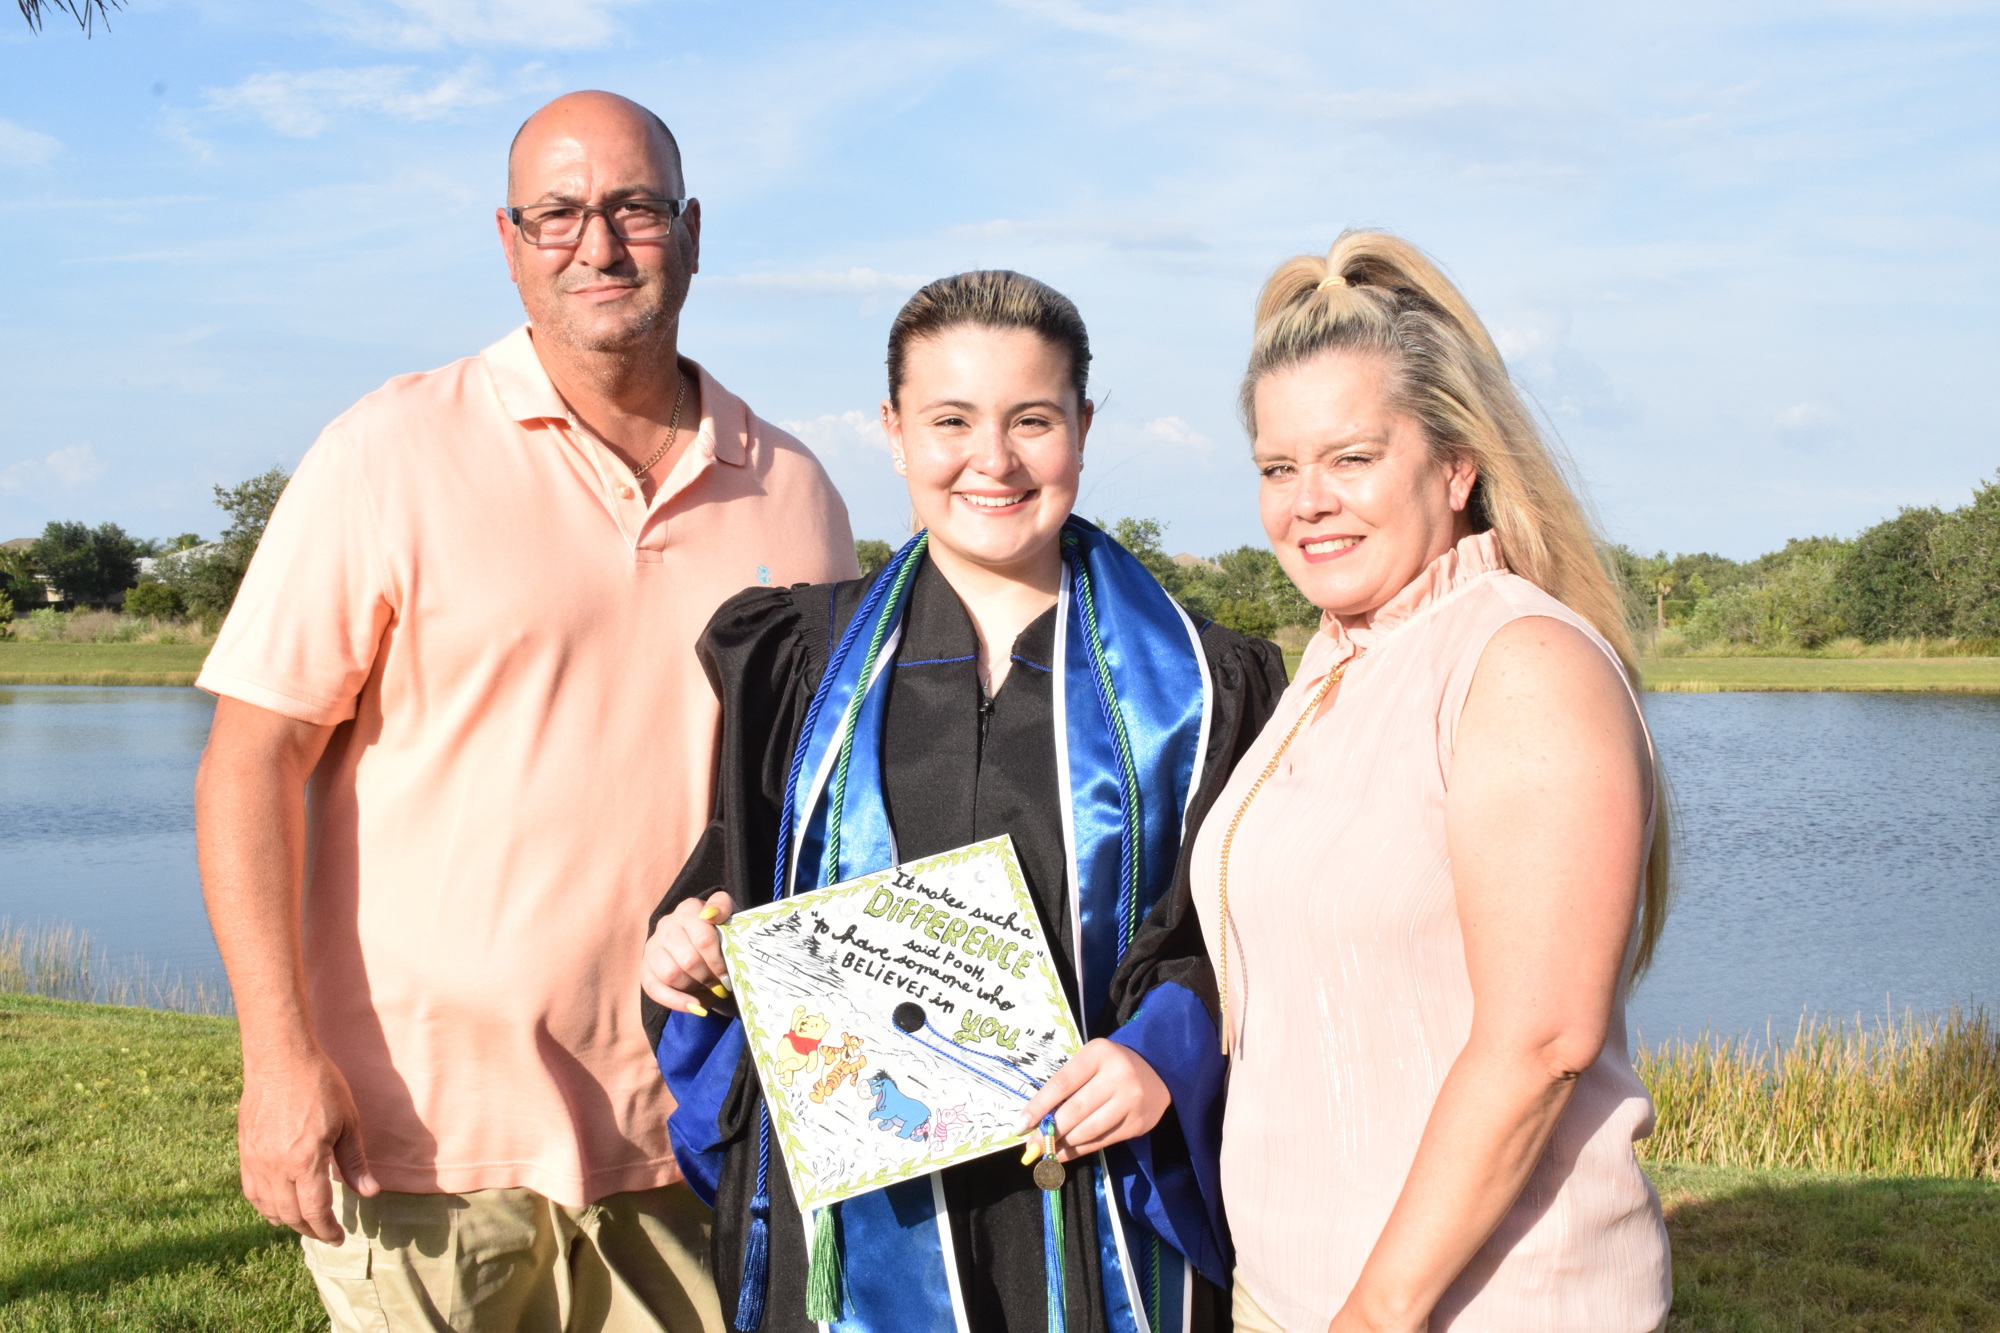 Central Park's Robert Vargas, his 18-year-old daughter Skyler Vargas and wife Brenda Freytes are excited to see what the future holds as Skyler graduates college and plans for law school.